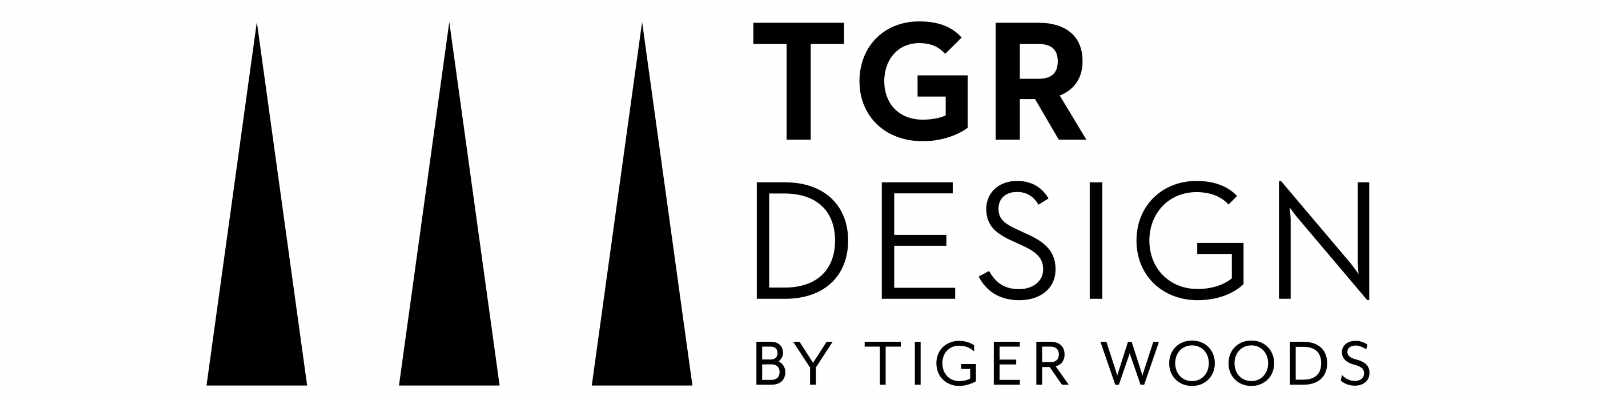 TGR Design by Tiger Woods Logo (photo by TGR)